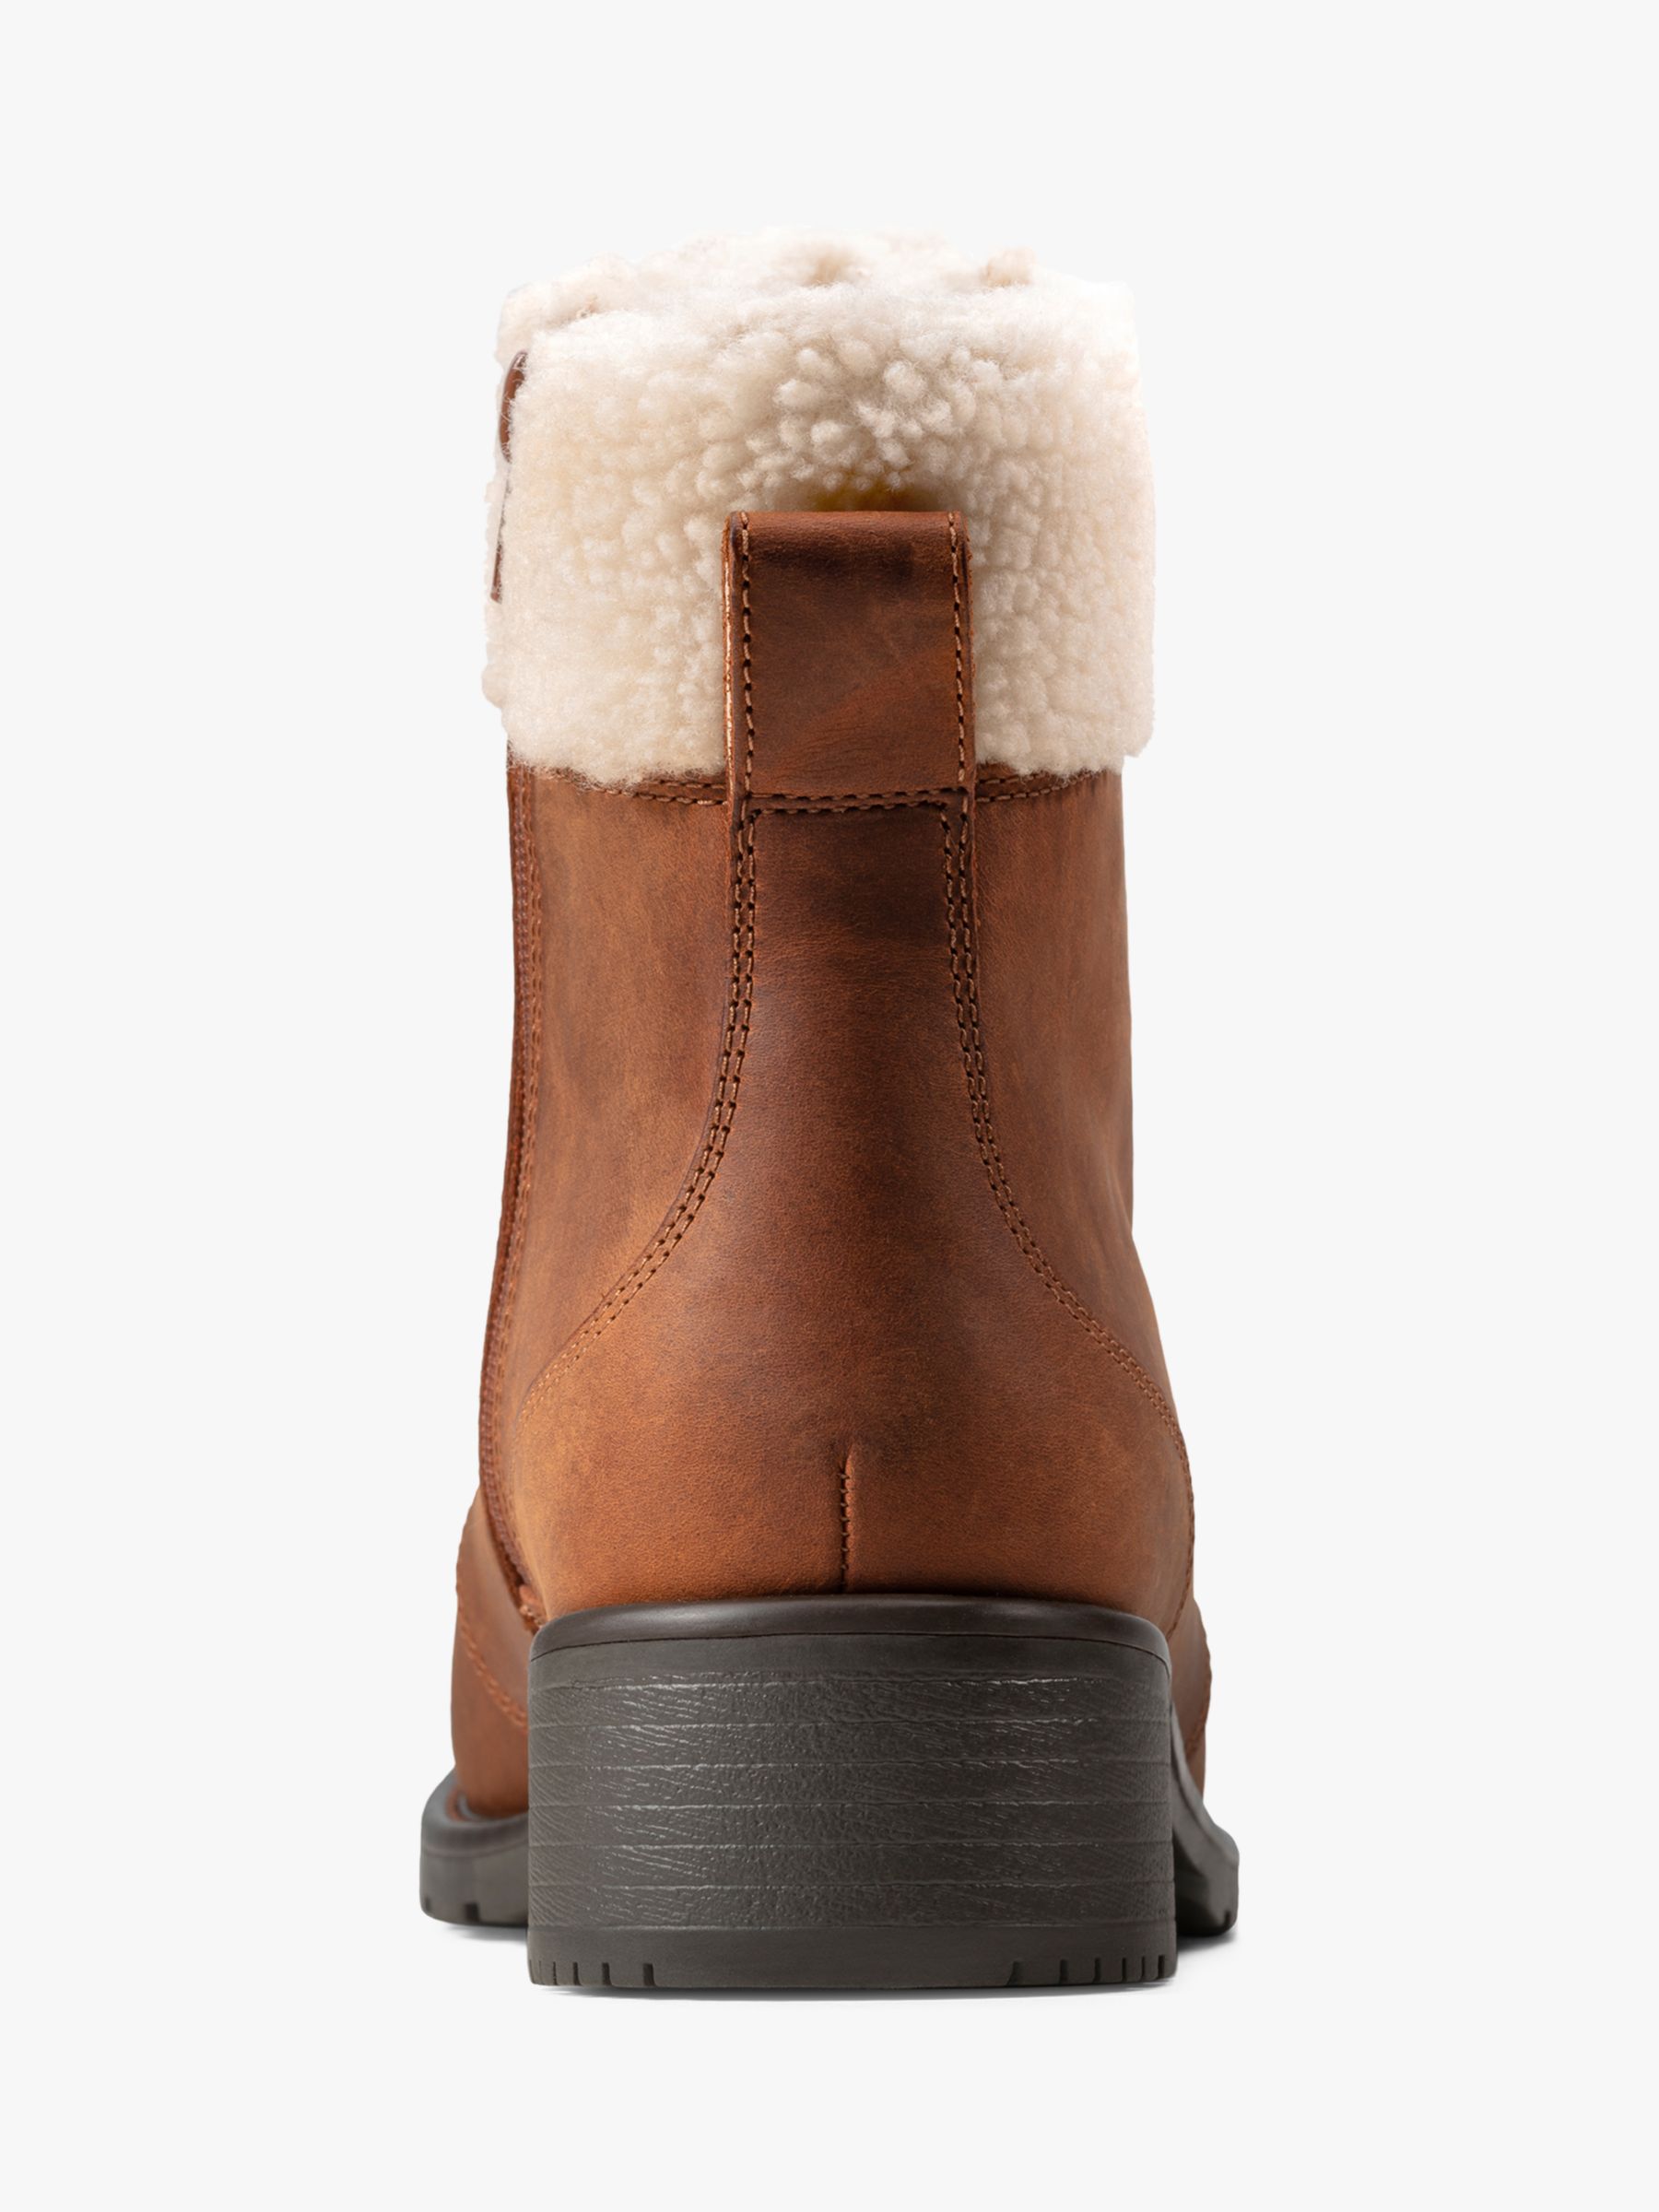 clarks fur lined boots